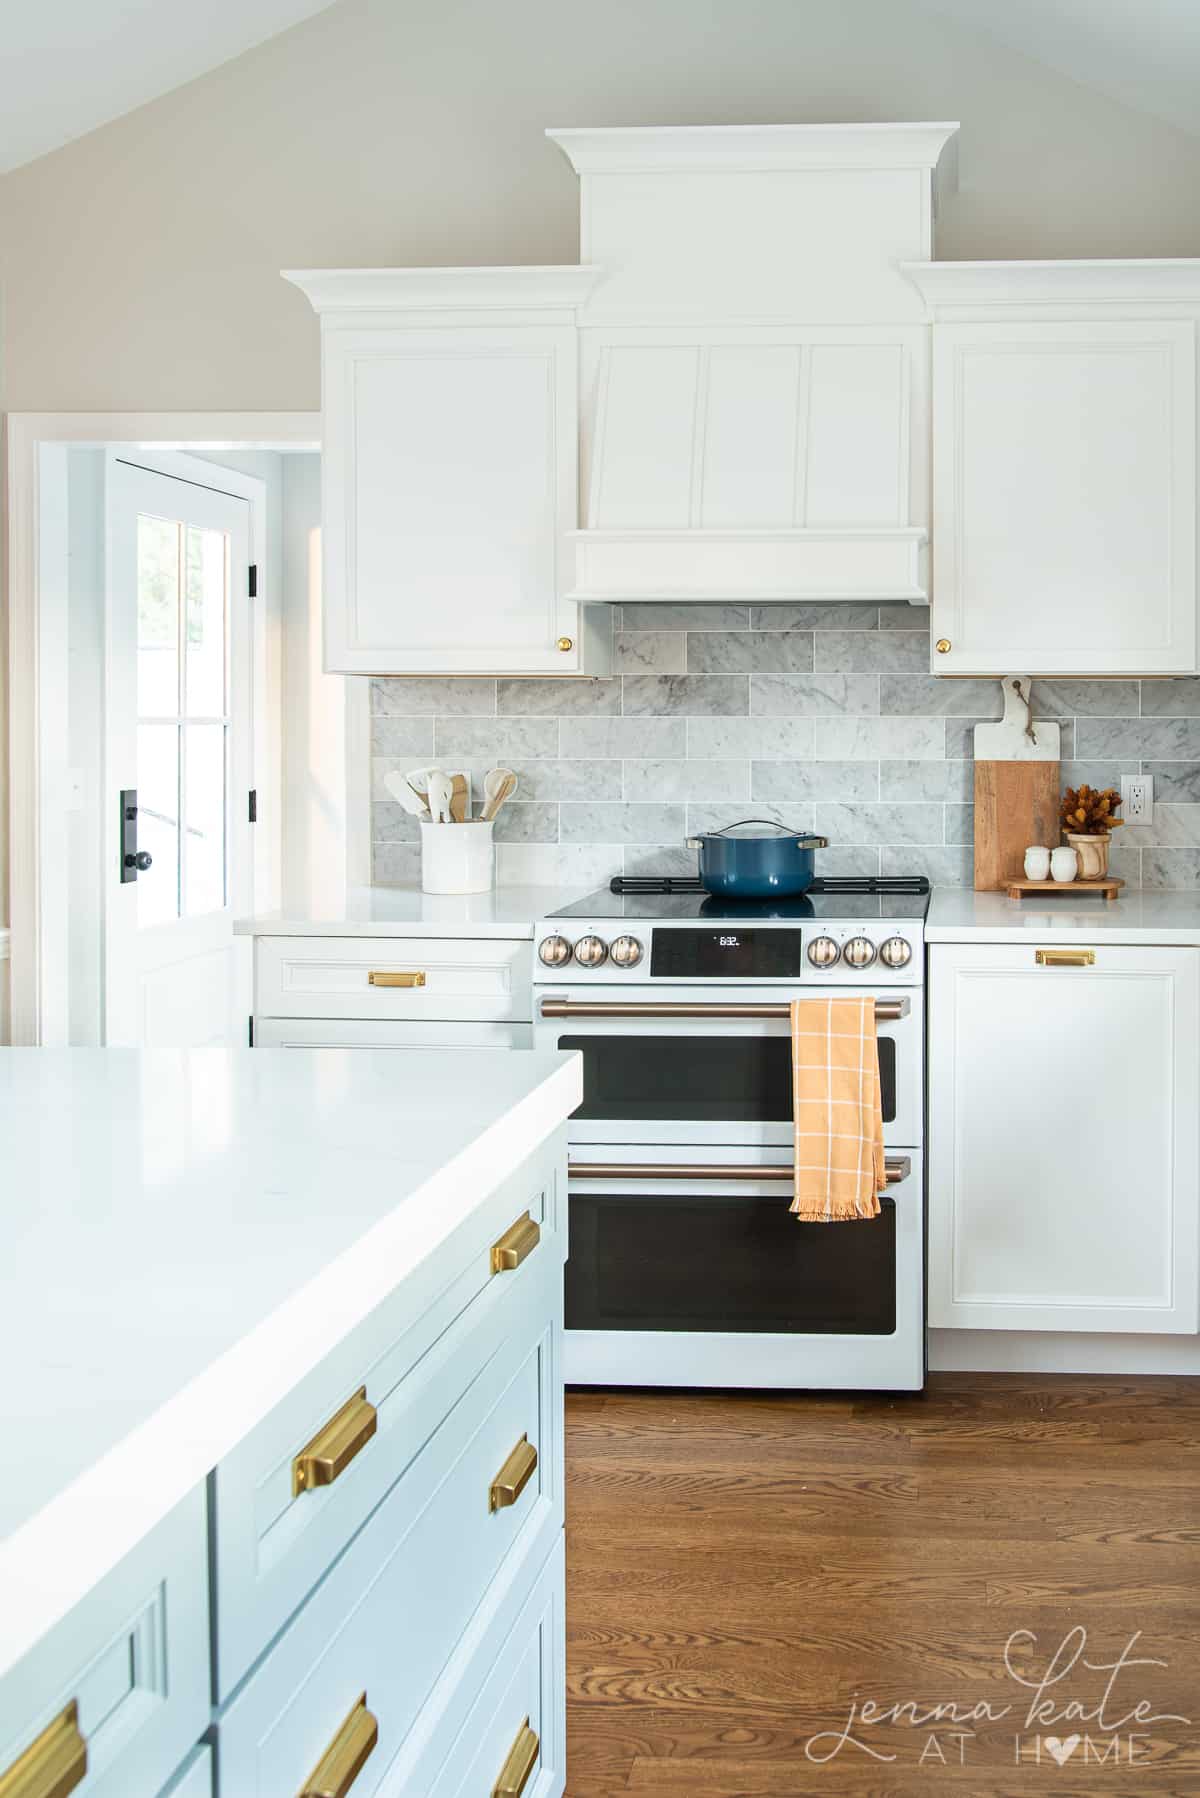 white kitchen with a mustard colored towel hanging off the stove